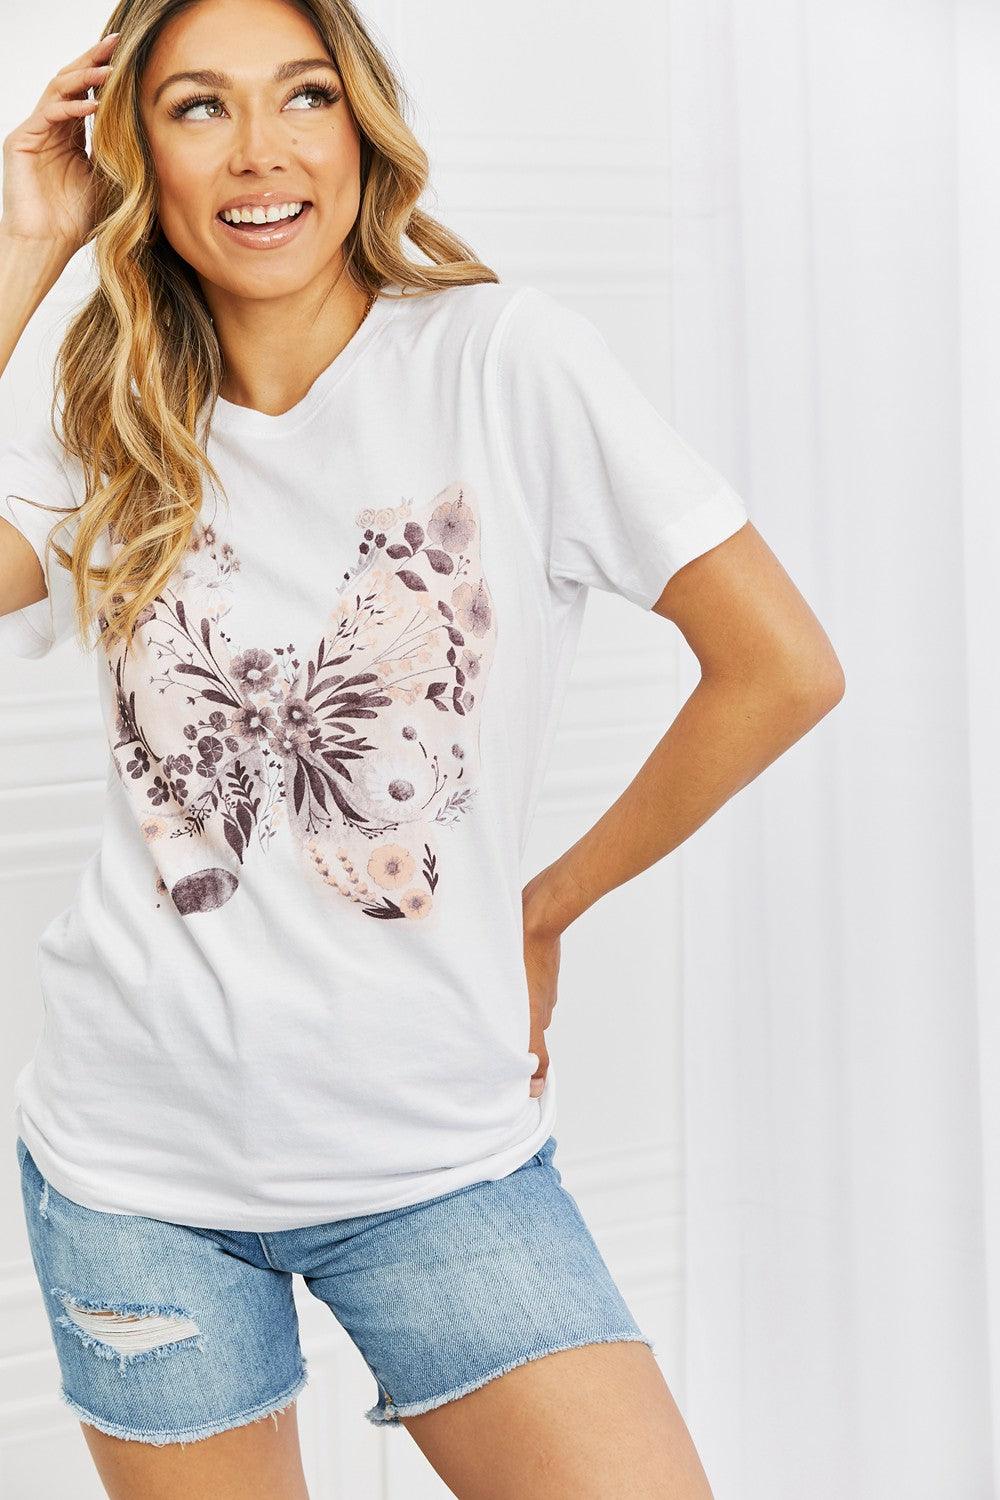 mineB You Give Me Butterflies Graphic T-Shirt - Glamorous Boutique USA L.L.C.